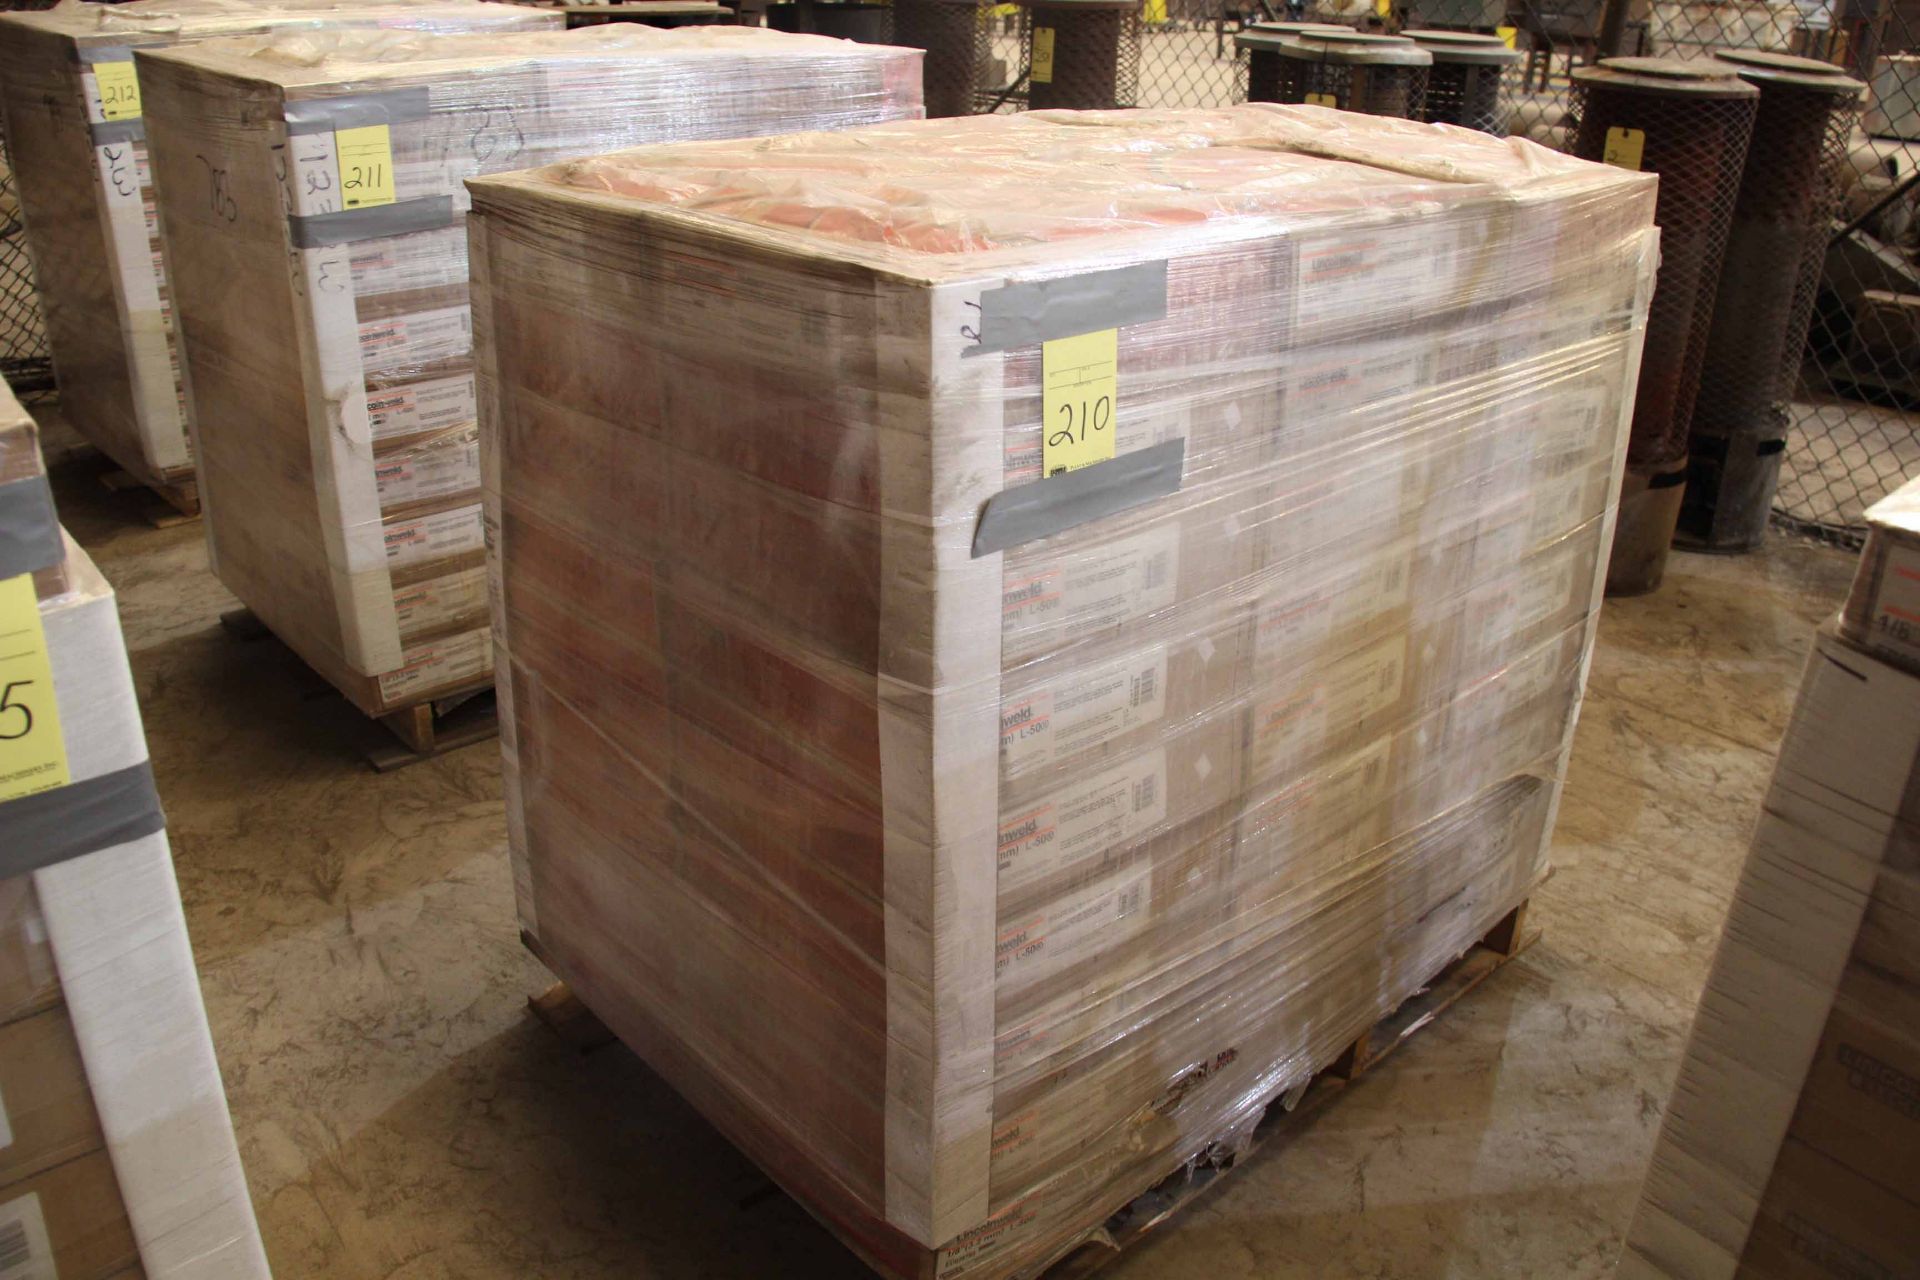 LOT OF WELDING WIRE, LINCOLN MDL. L-50, 1/8" (3.2mm) (54 boxes - 60 lbs. ea.) (on one pallet) - Image 2 of 2